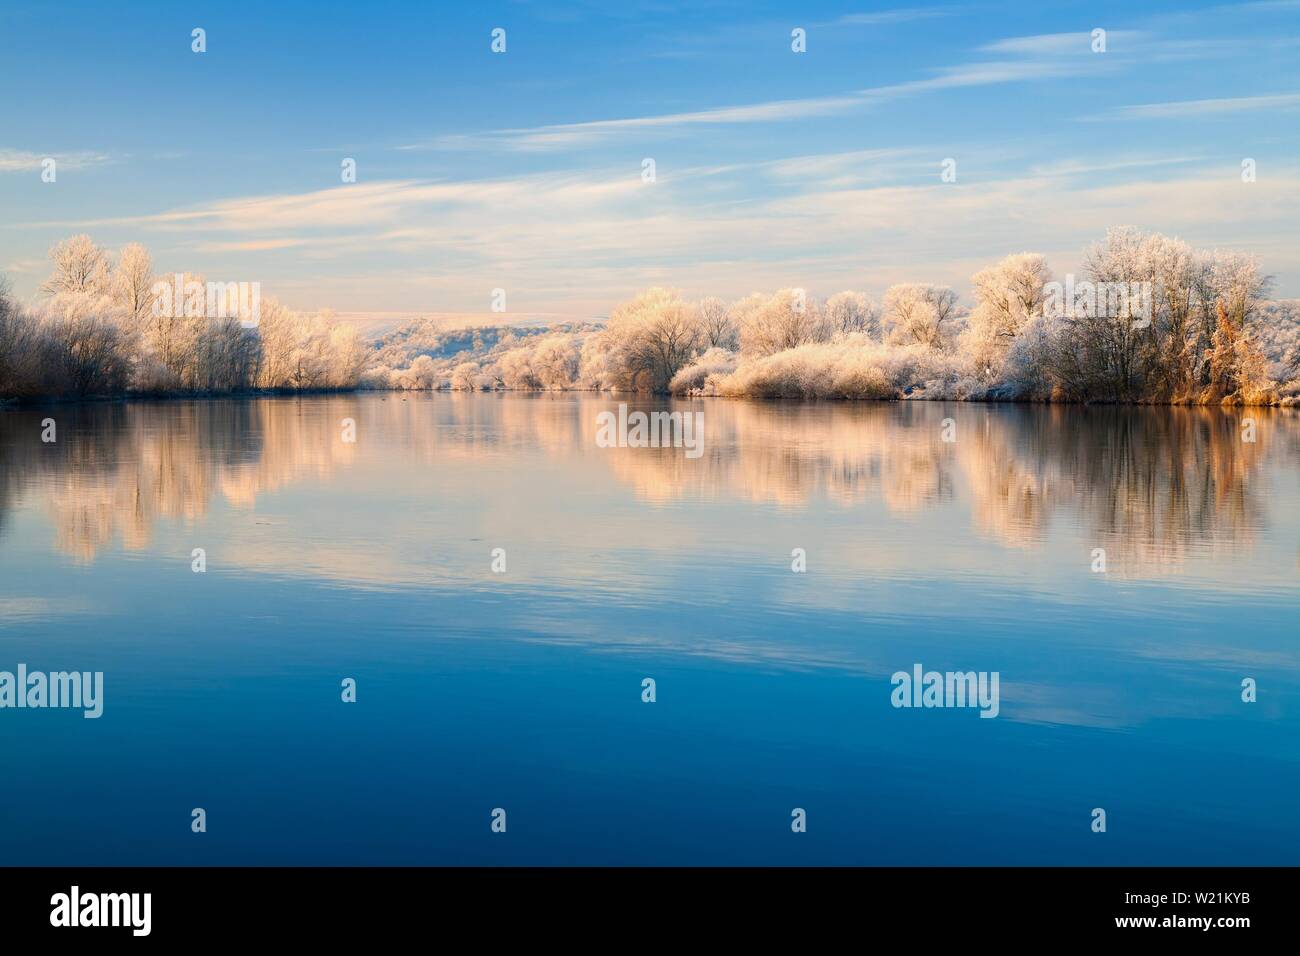 River landscape in winter at the river Saale, trees with frost and snow at the bank in the morning light, water reflection, Lower Saale Valley nature Stock Photo